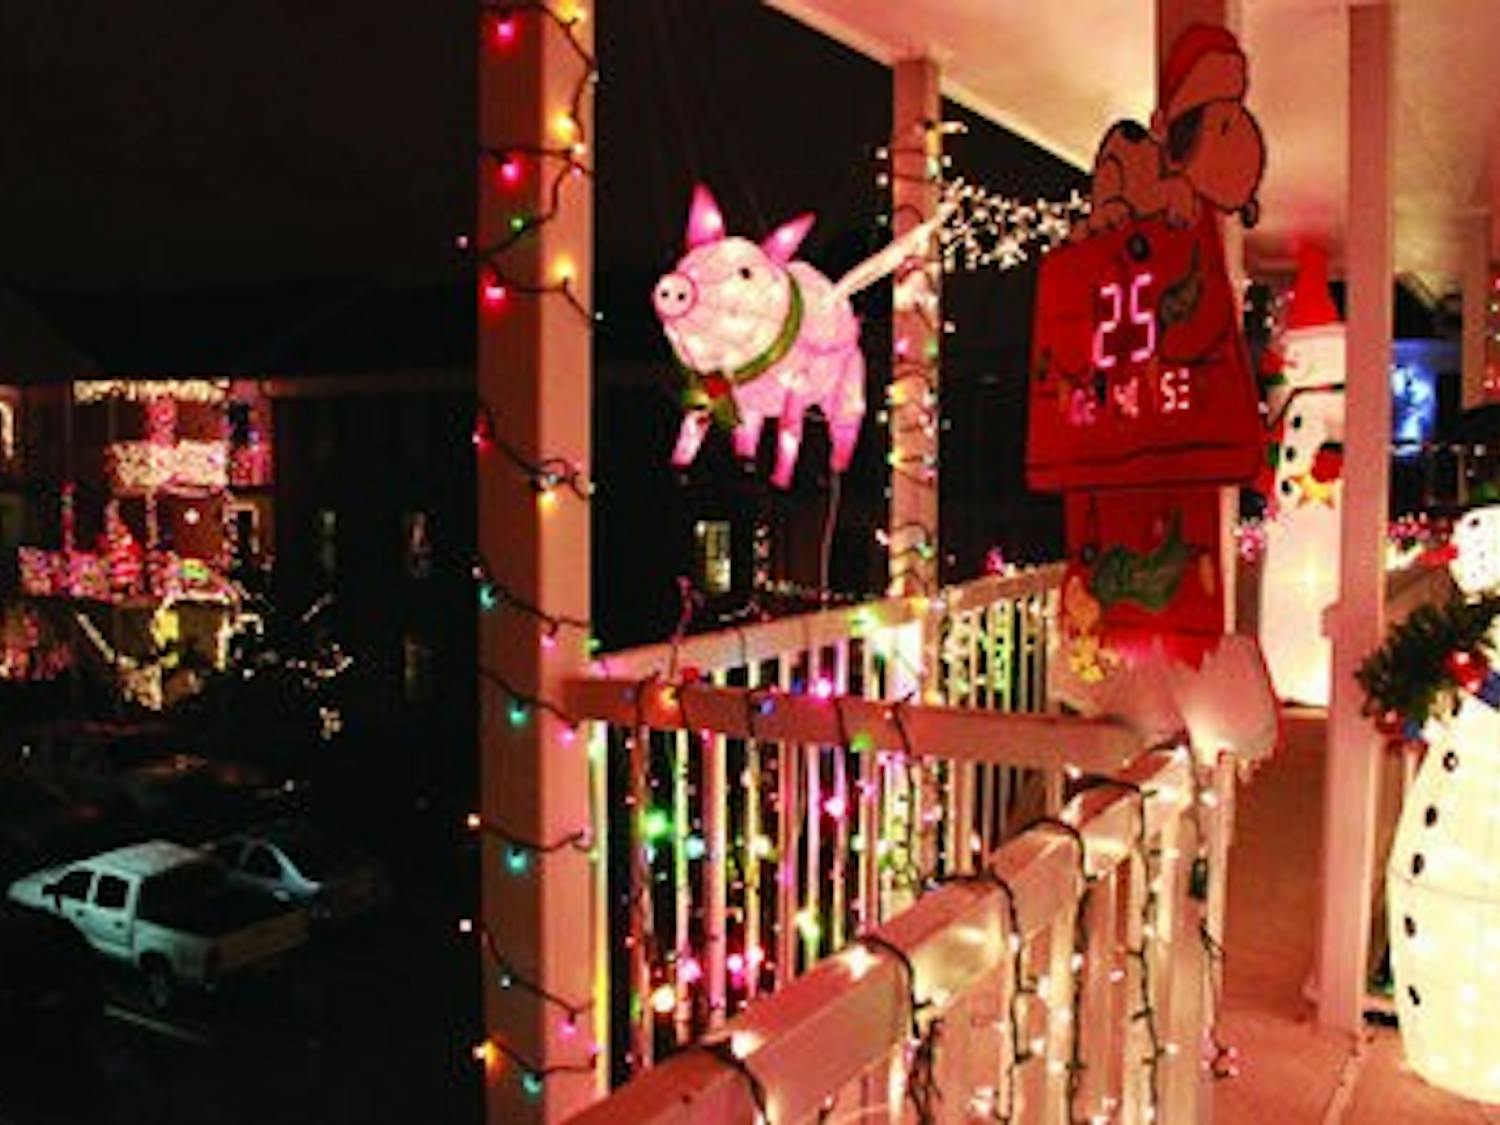 A flying pig and a snowman adorn the brightly-lit apartment 26 at University Corner. (Emily Adams / Photo Editor)